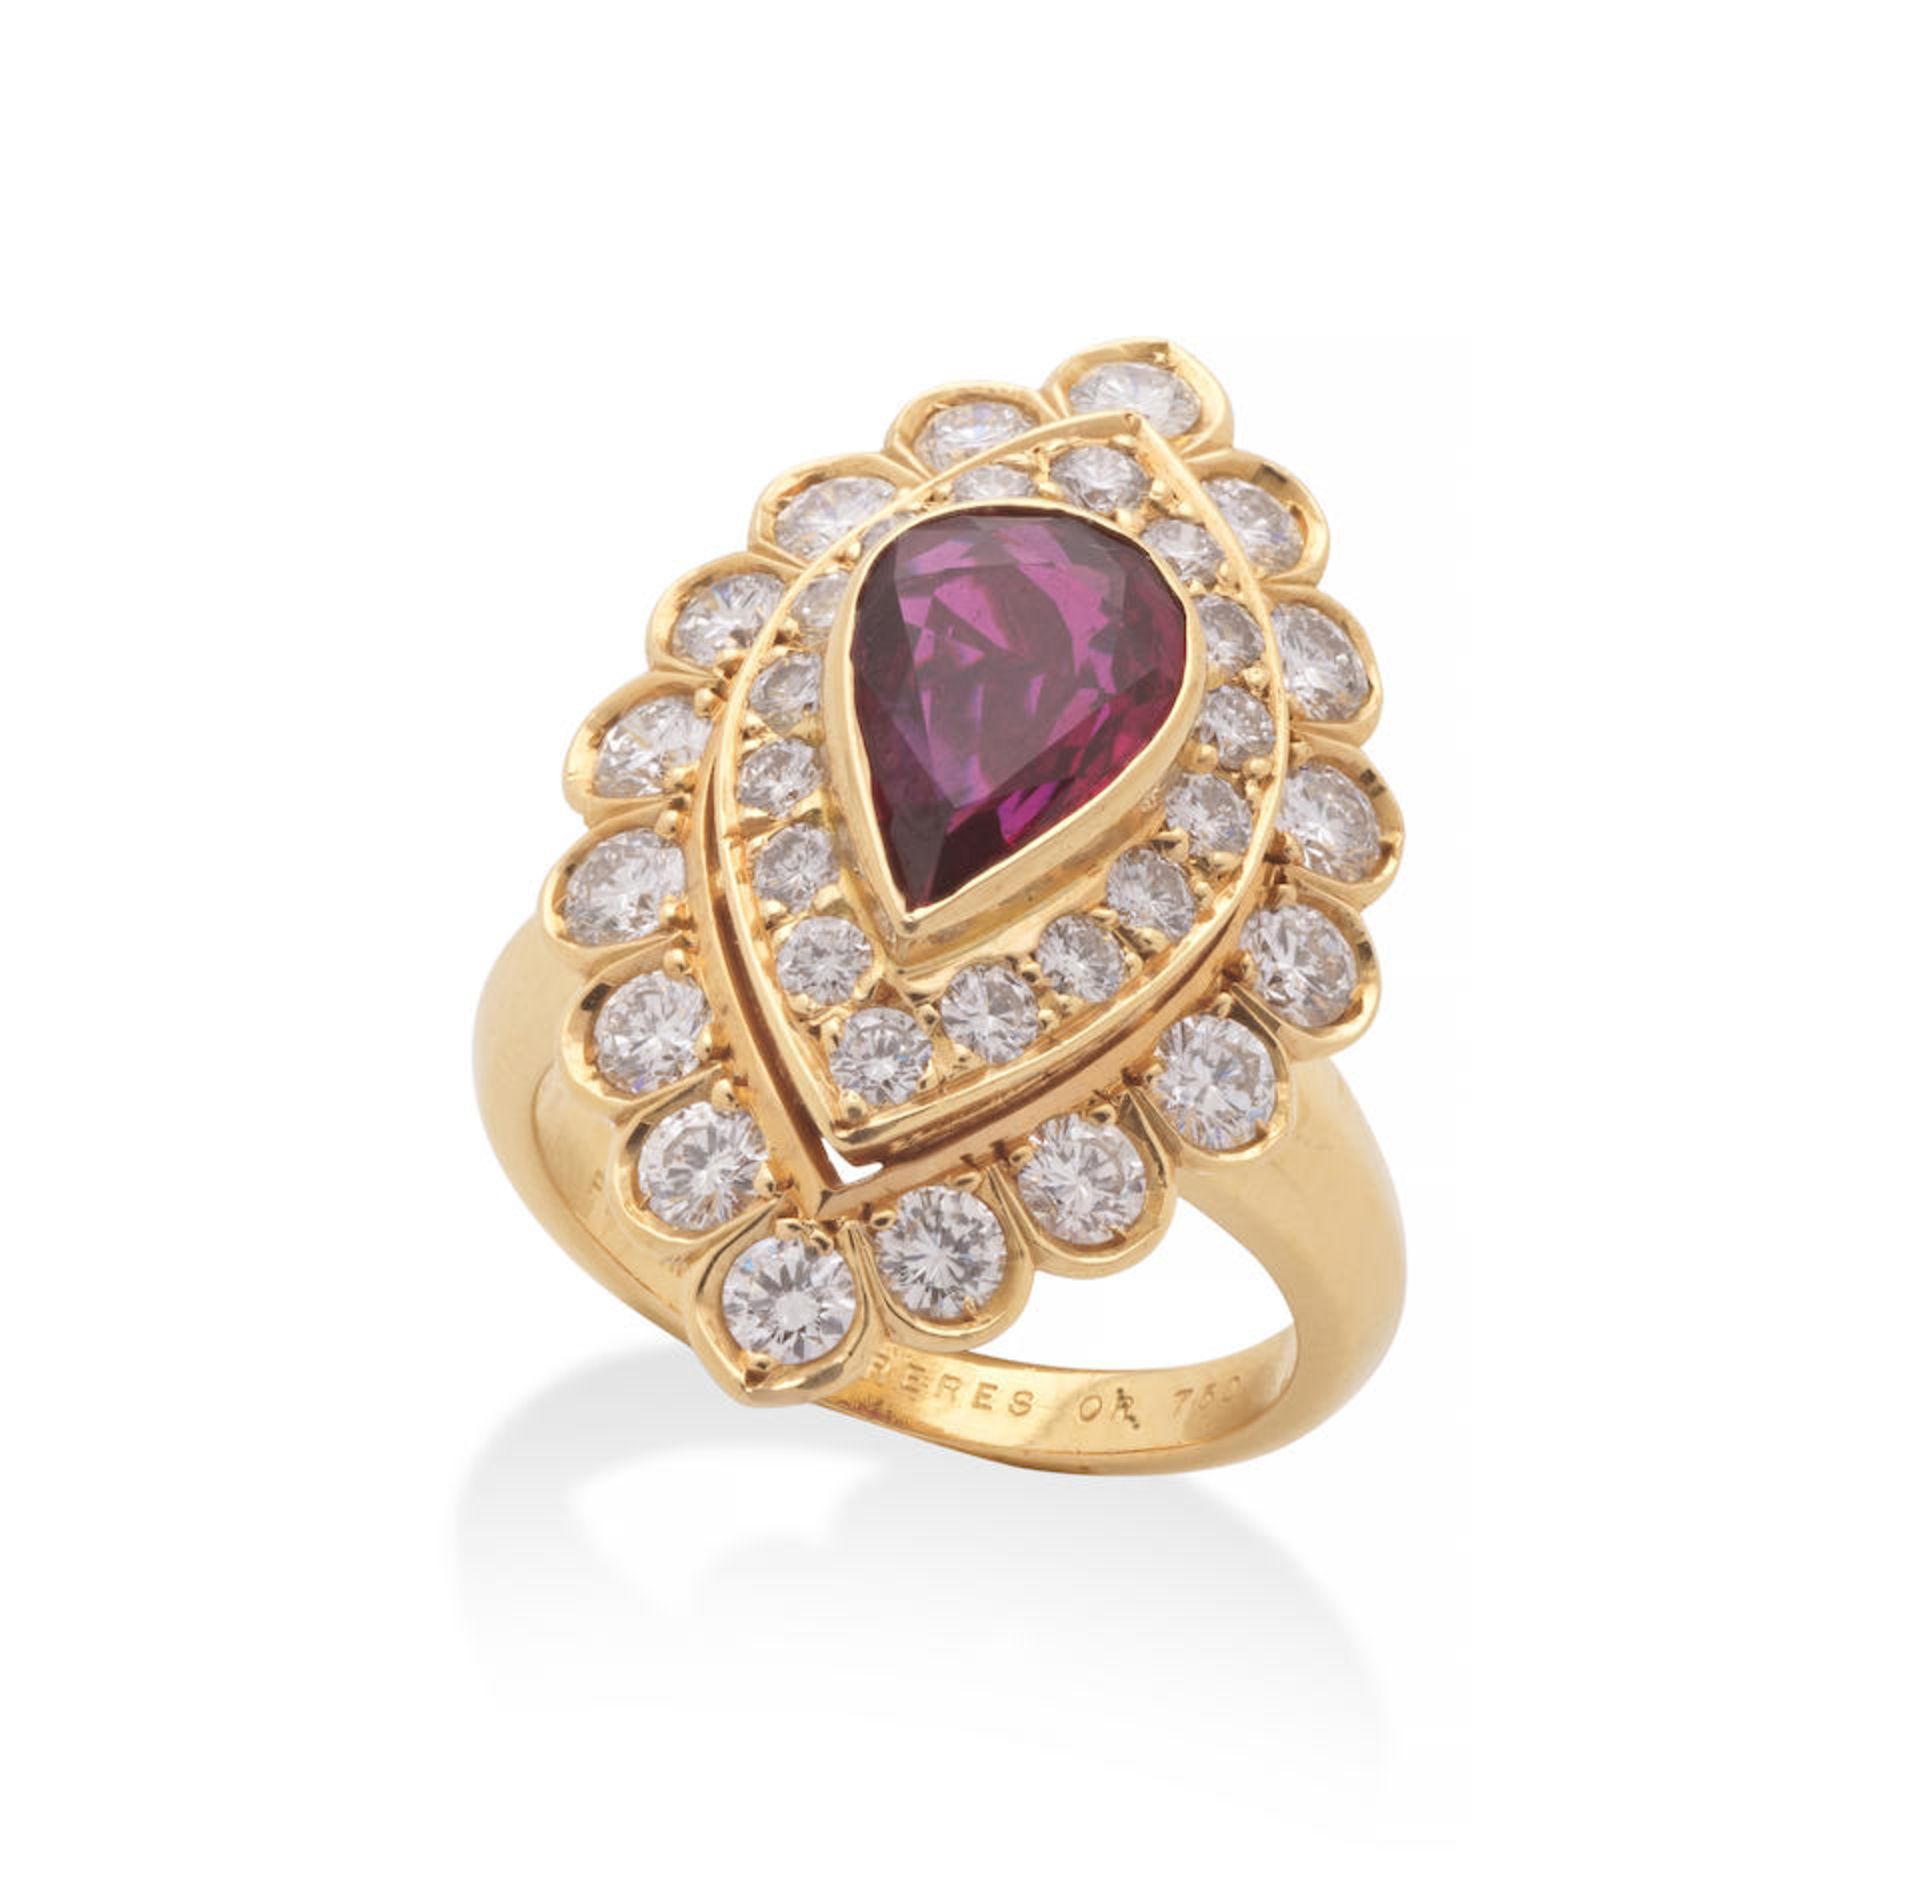 FROHMANN FRÈRES: BAGUE RUBIS ET DIAMANTS FROHMANN FRÈRES: RUBY AND DIAMOND RING - Image 2 of 3